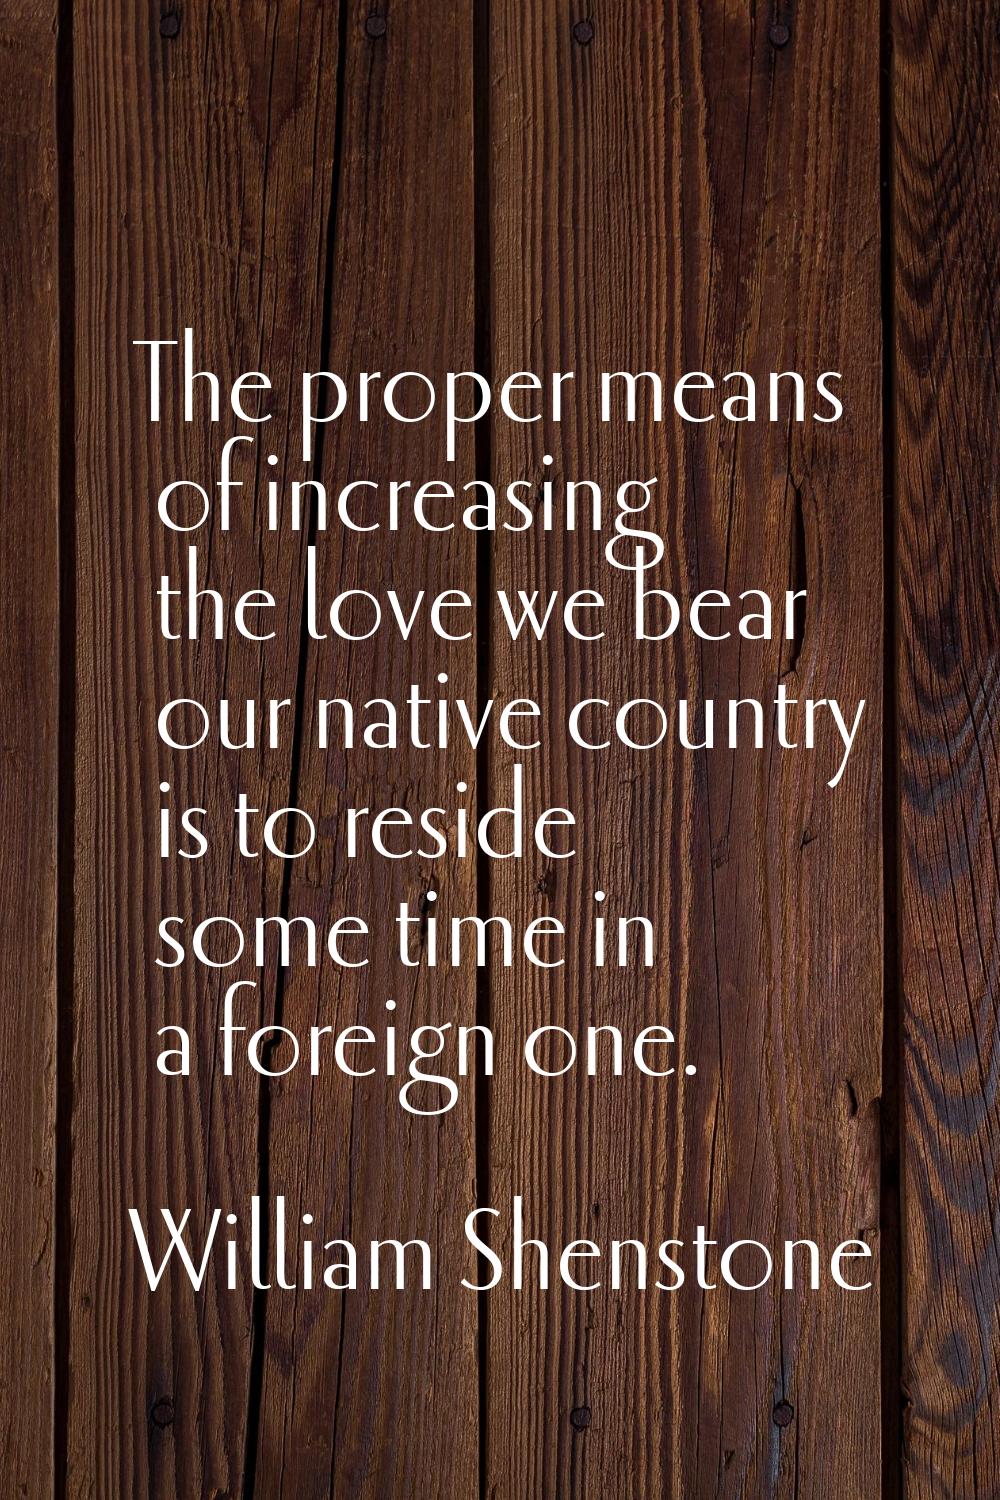 The proper means of increasing the love we bear our native country is to reside some time in a fore